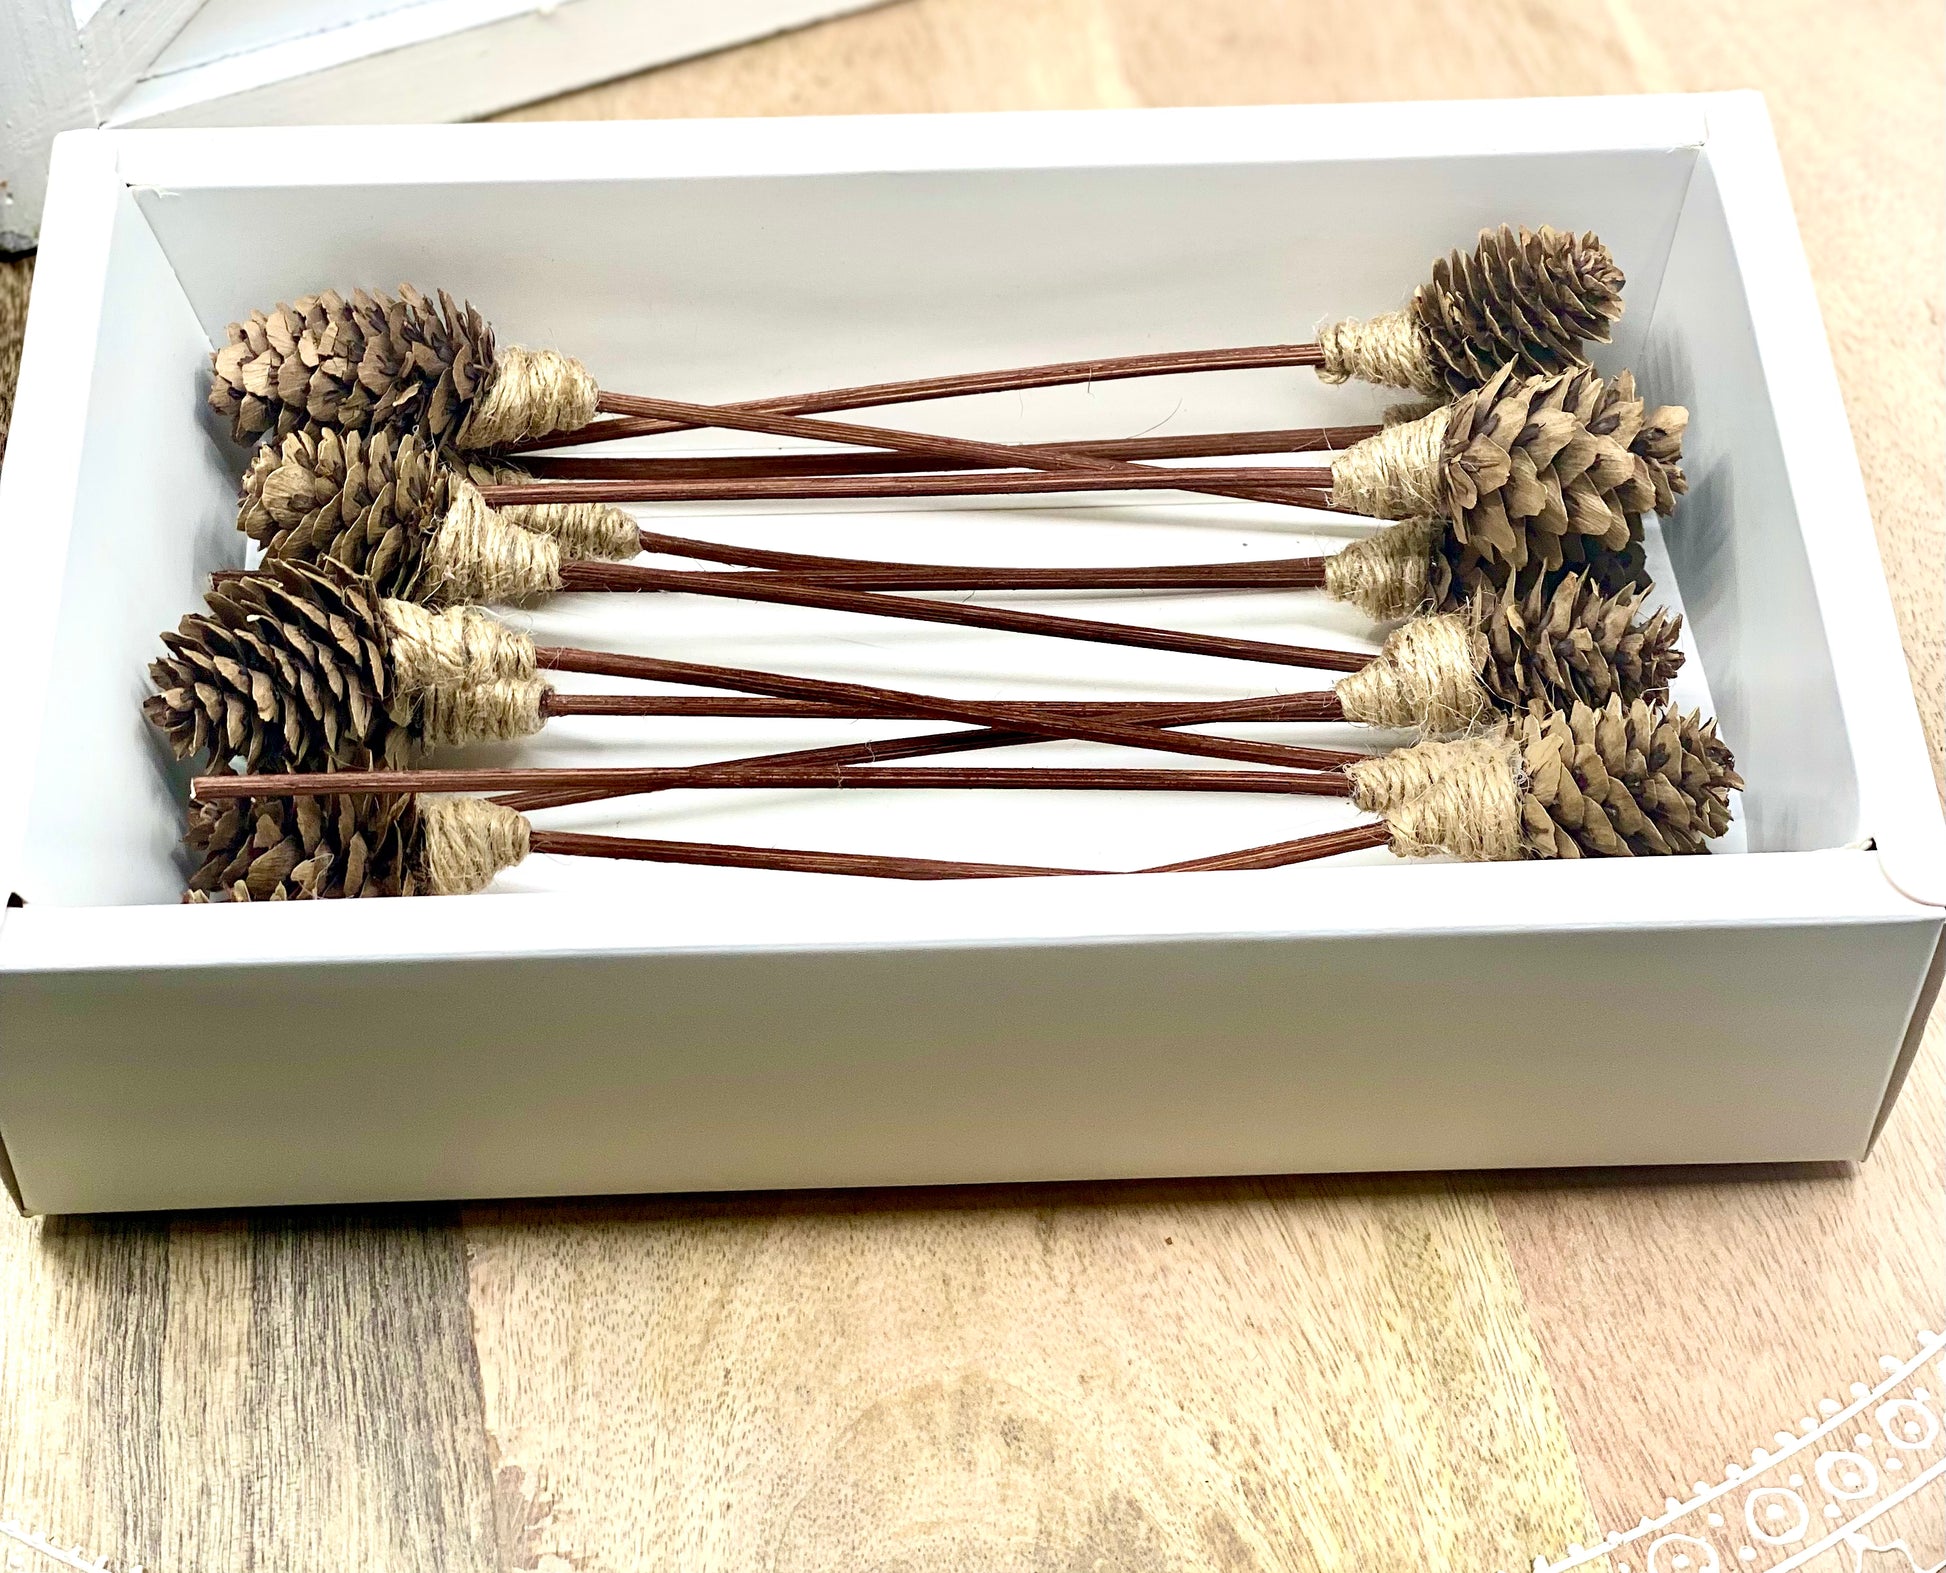 Assorted Mini Sola Wood Flower, 9” Rattan Wood Reed Diffuser Replacement Sticks, 12 Pk - 12 Pcs Mixed (with Pinecones)